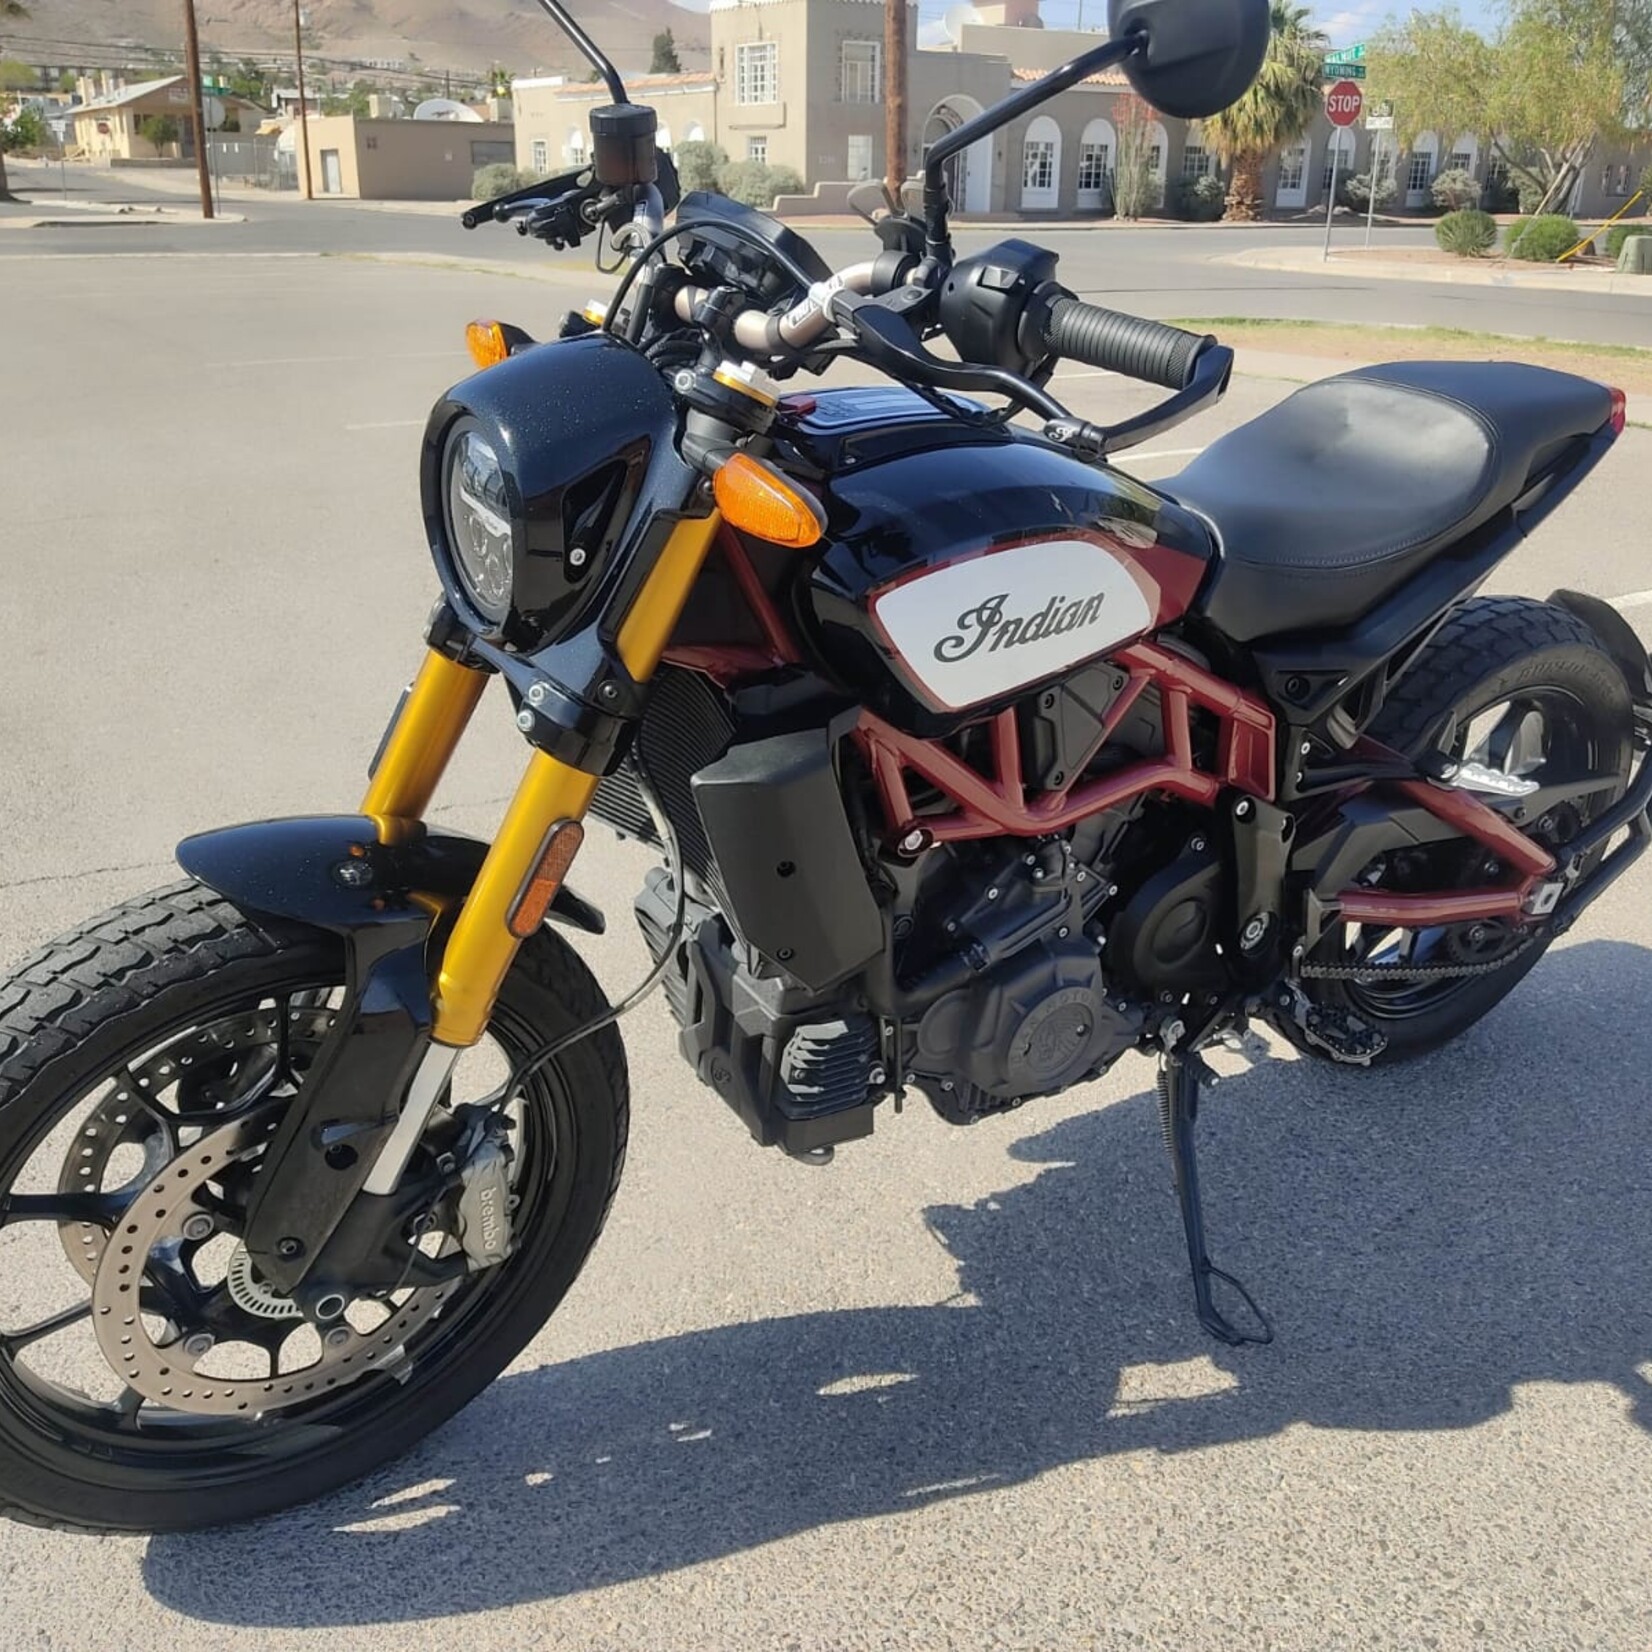 2019 Indian FTR 1200 S Motorcycle For Sale